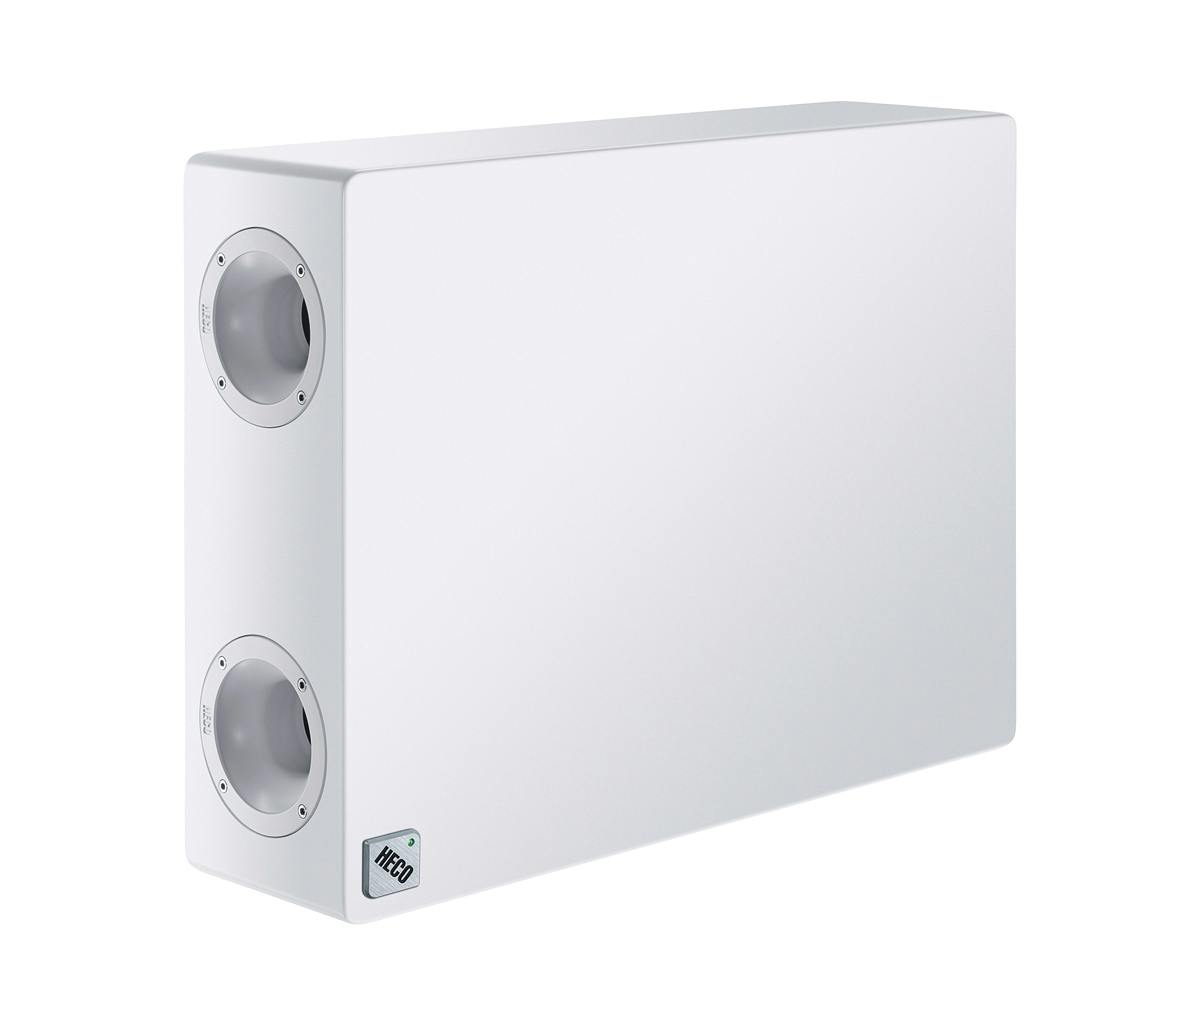 Heco Ambient 88 F Compact sub